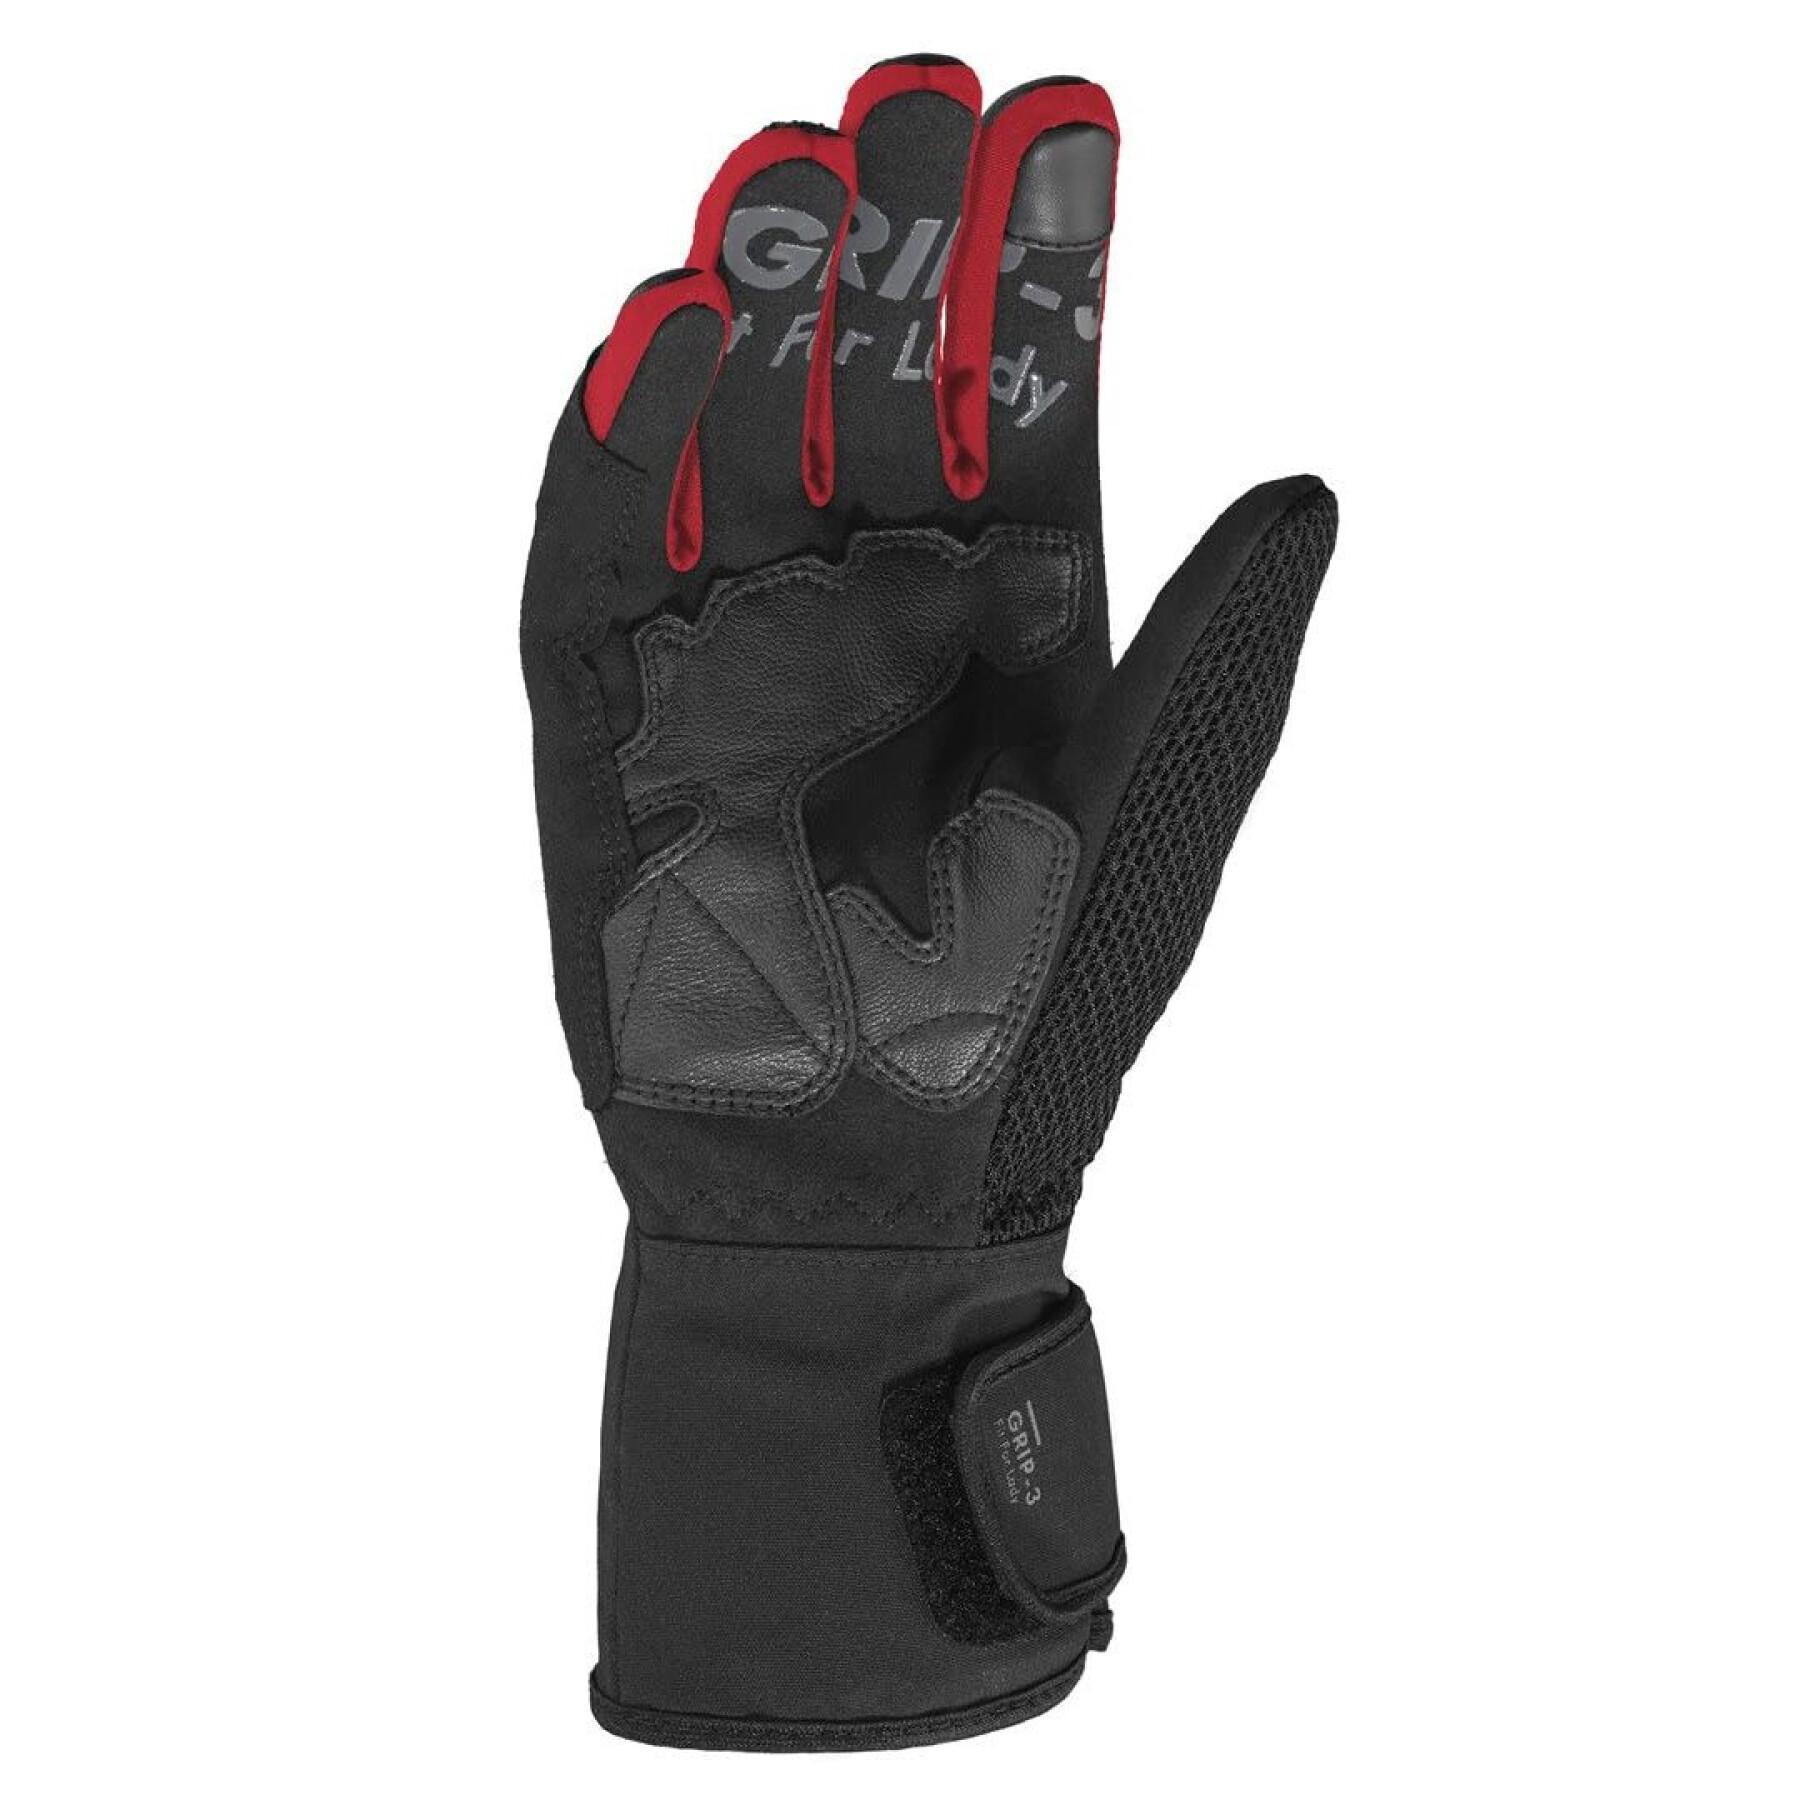 Women's winter motorcycle gloves Spidi grip 3 h2out